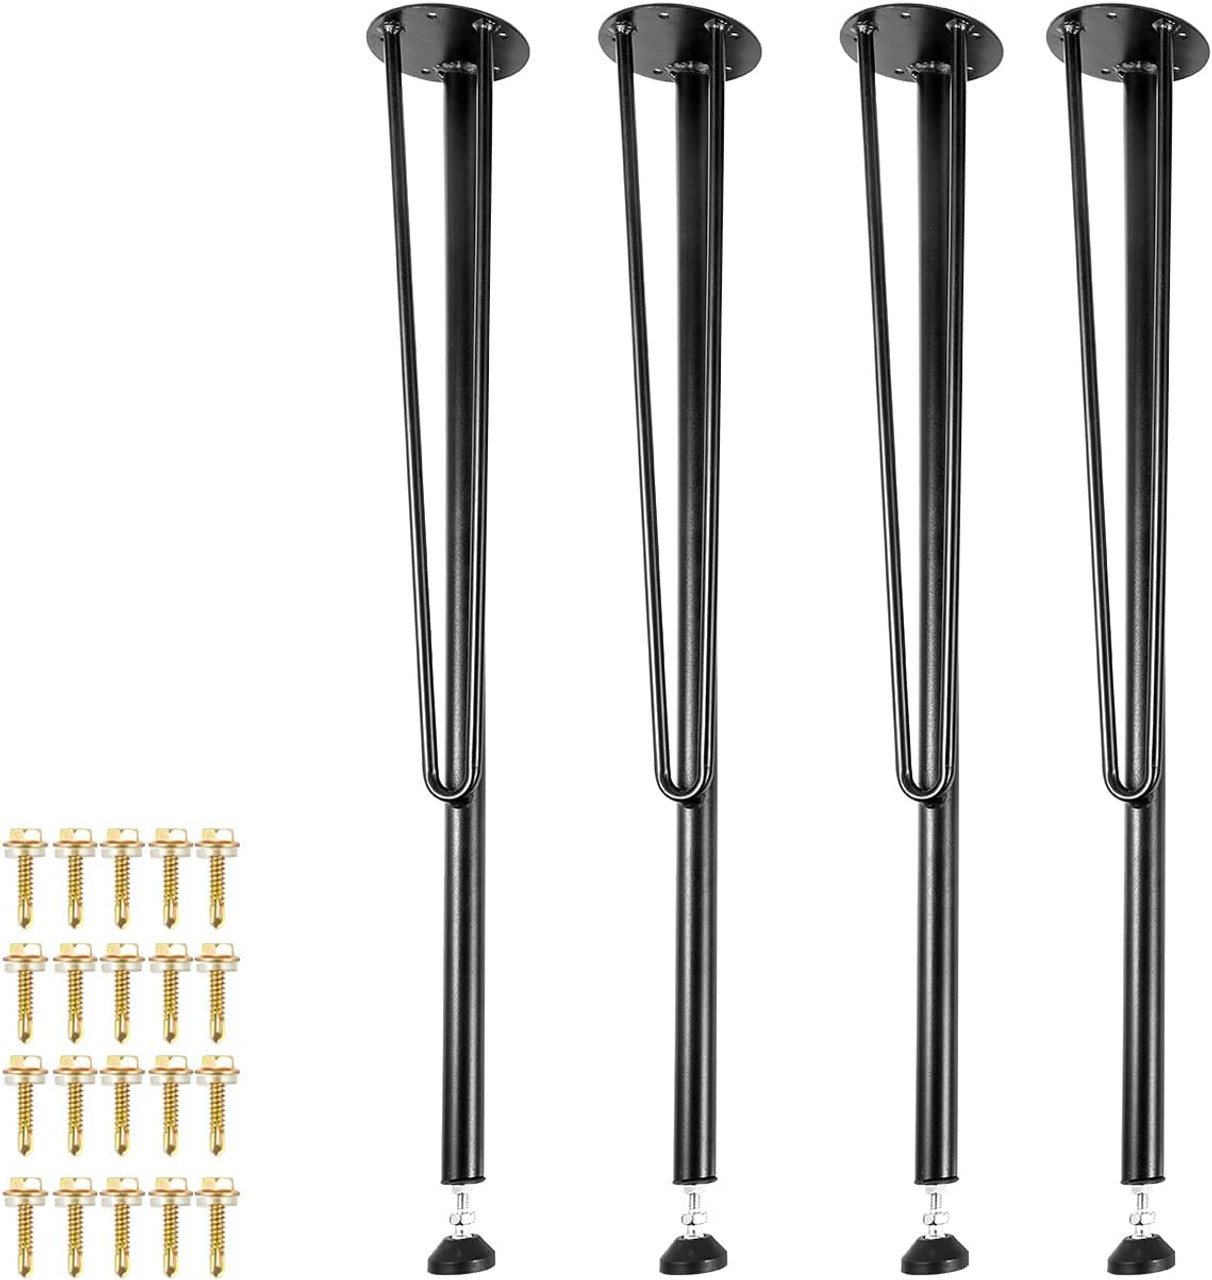 Hairpin Metal Table Legs 28 Inch Desk Legs Set of 4 Heavy Duty Bench Legs 3-Rod Metal Furniture Legs Wrought Iron Coffee Table Legs Home DIY for